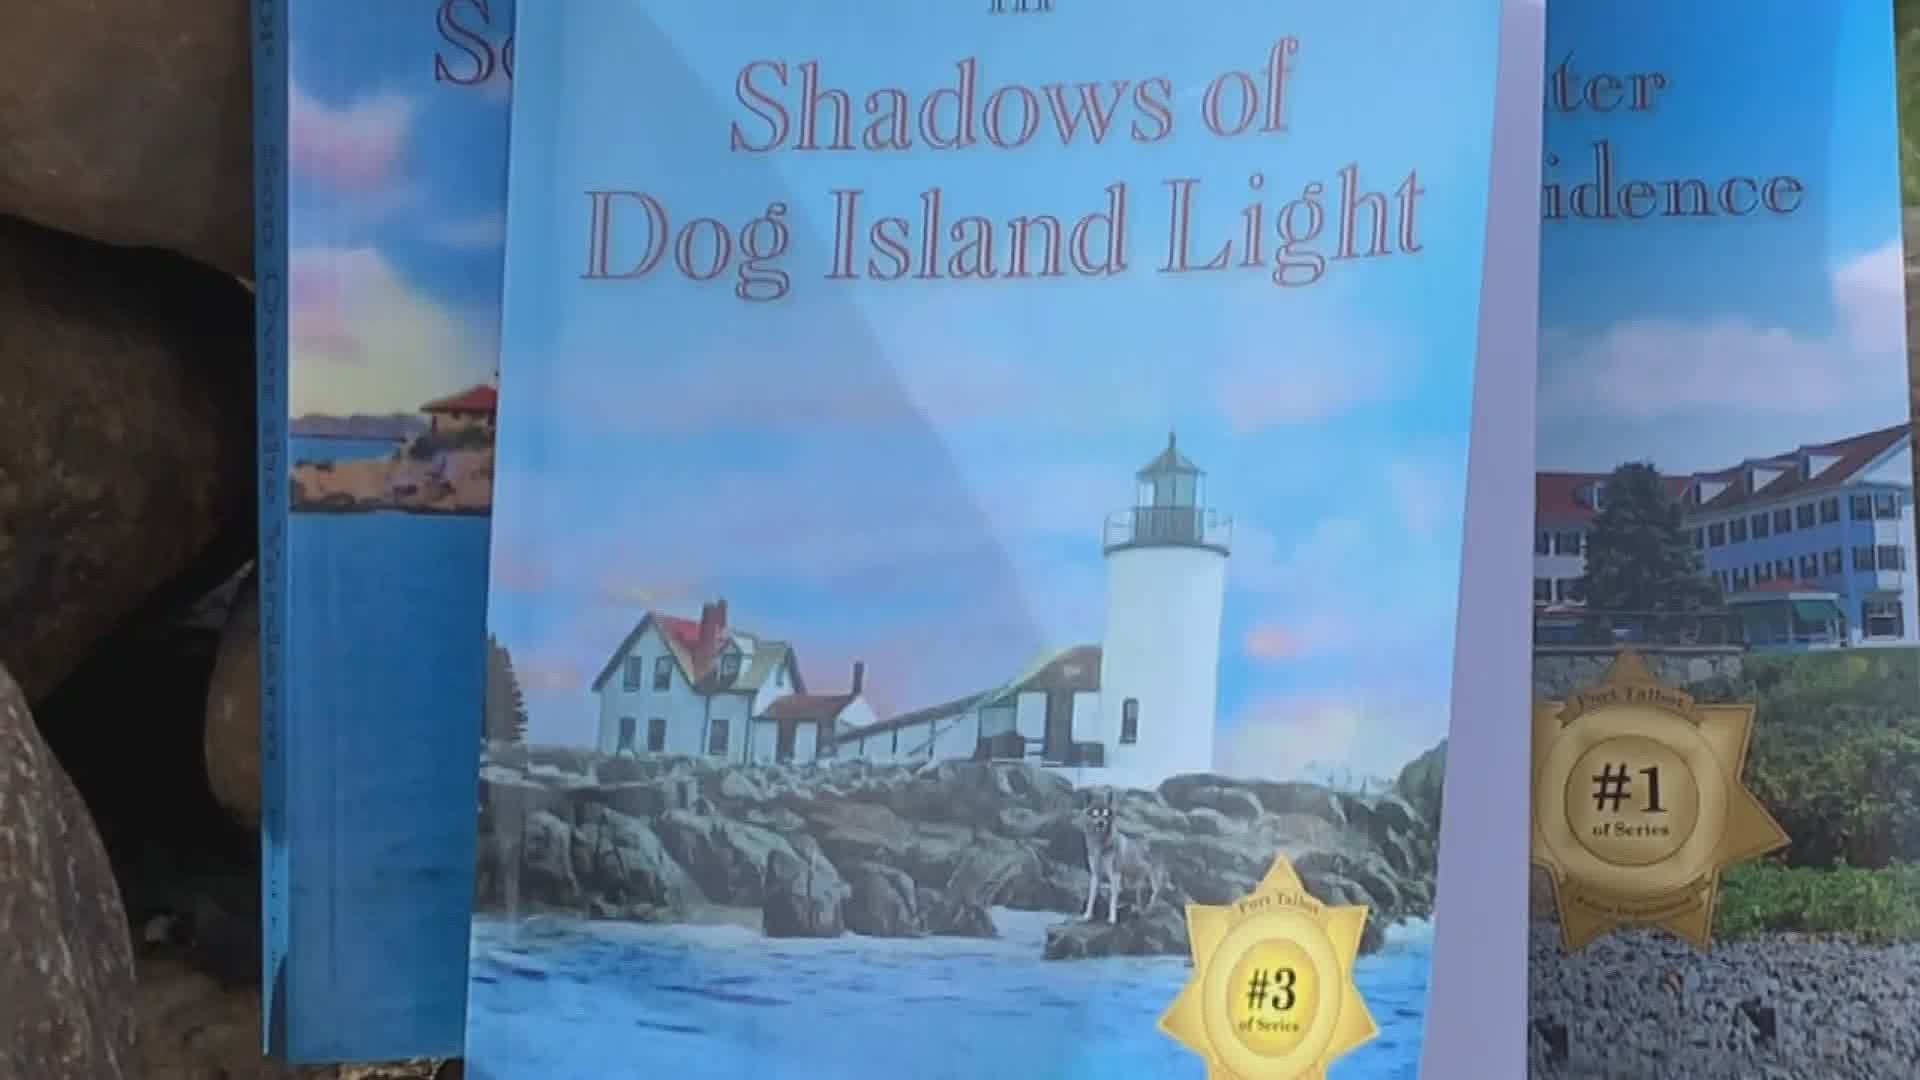 James Bruner releases the third novel in The Bike Cop series Shadows of Dog Island Light about a young man in the 80s working for a police dept. in southern Maine.